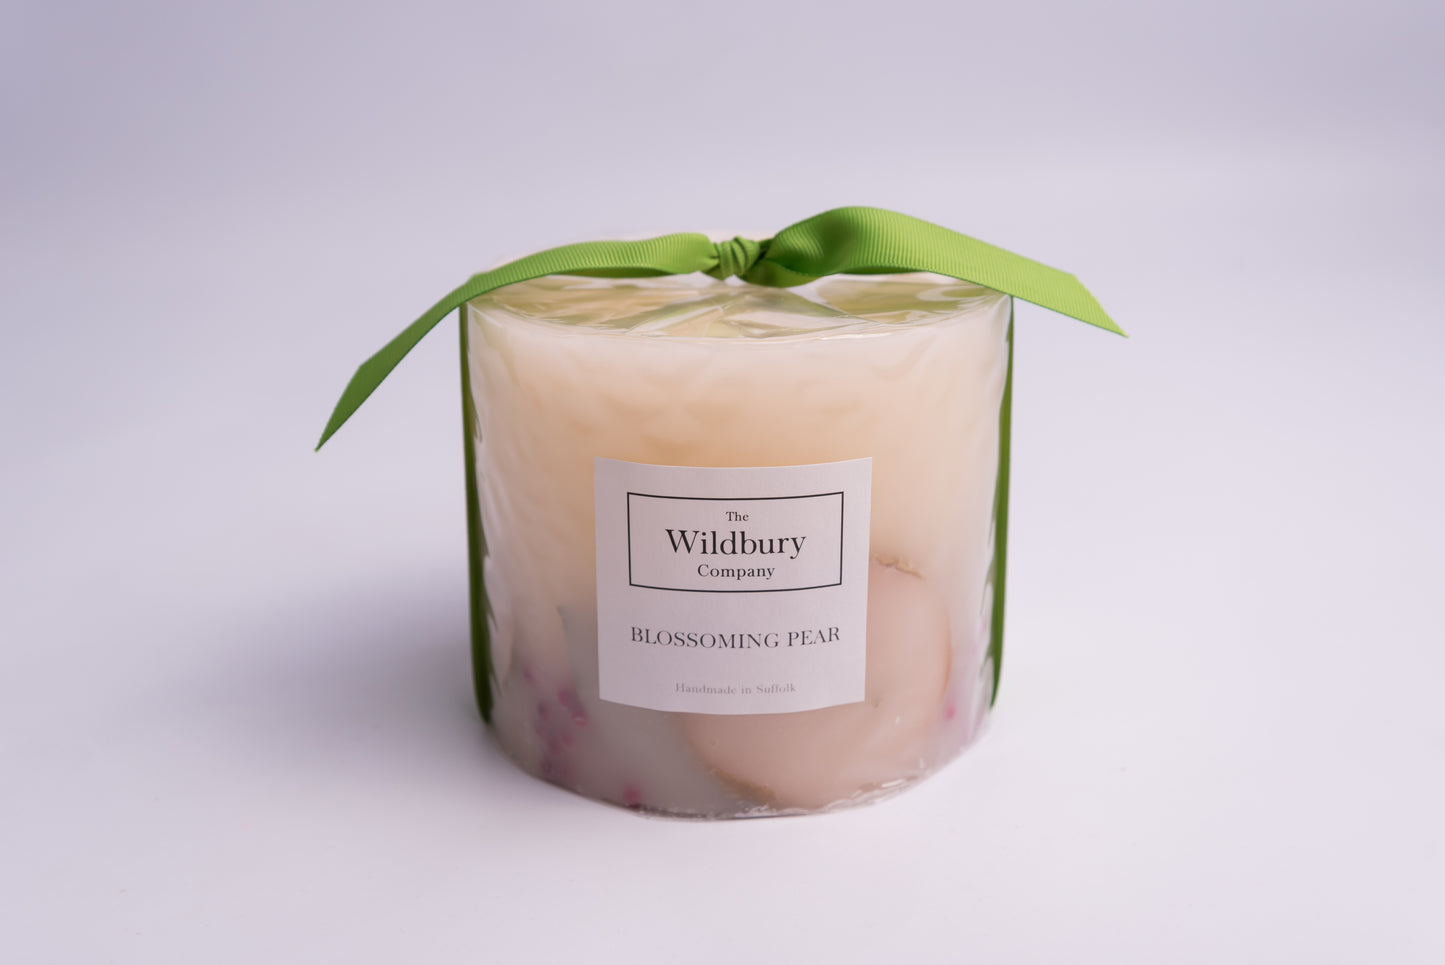 Large Three Wiick Botanical Candle with apple slices and berries carefully suspended within the hand-poured wax, Tied with a vibrant green ribbon.